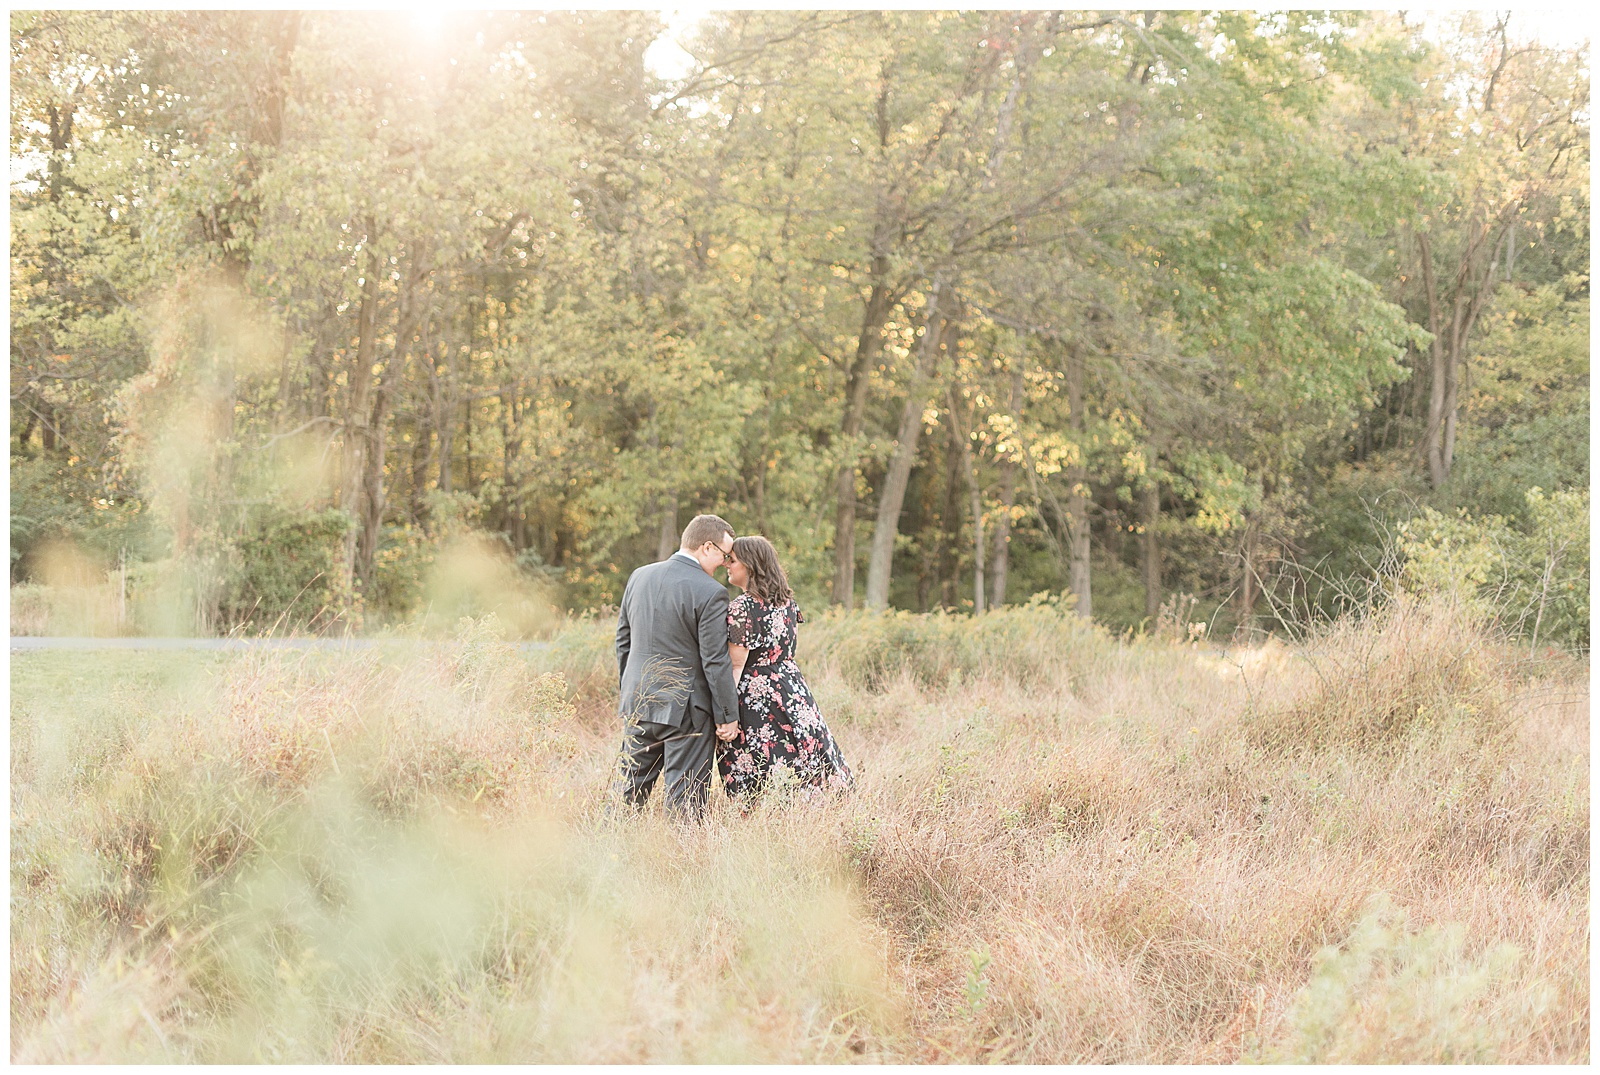 couple touching foreheads, standing in a field of grasses with light coming through the trees behind